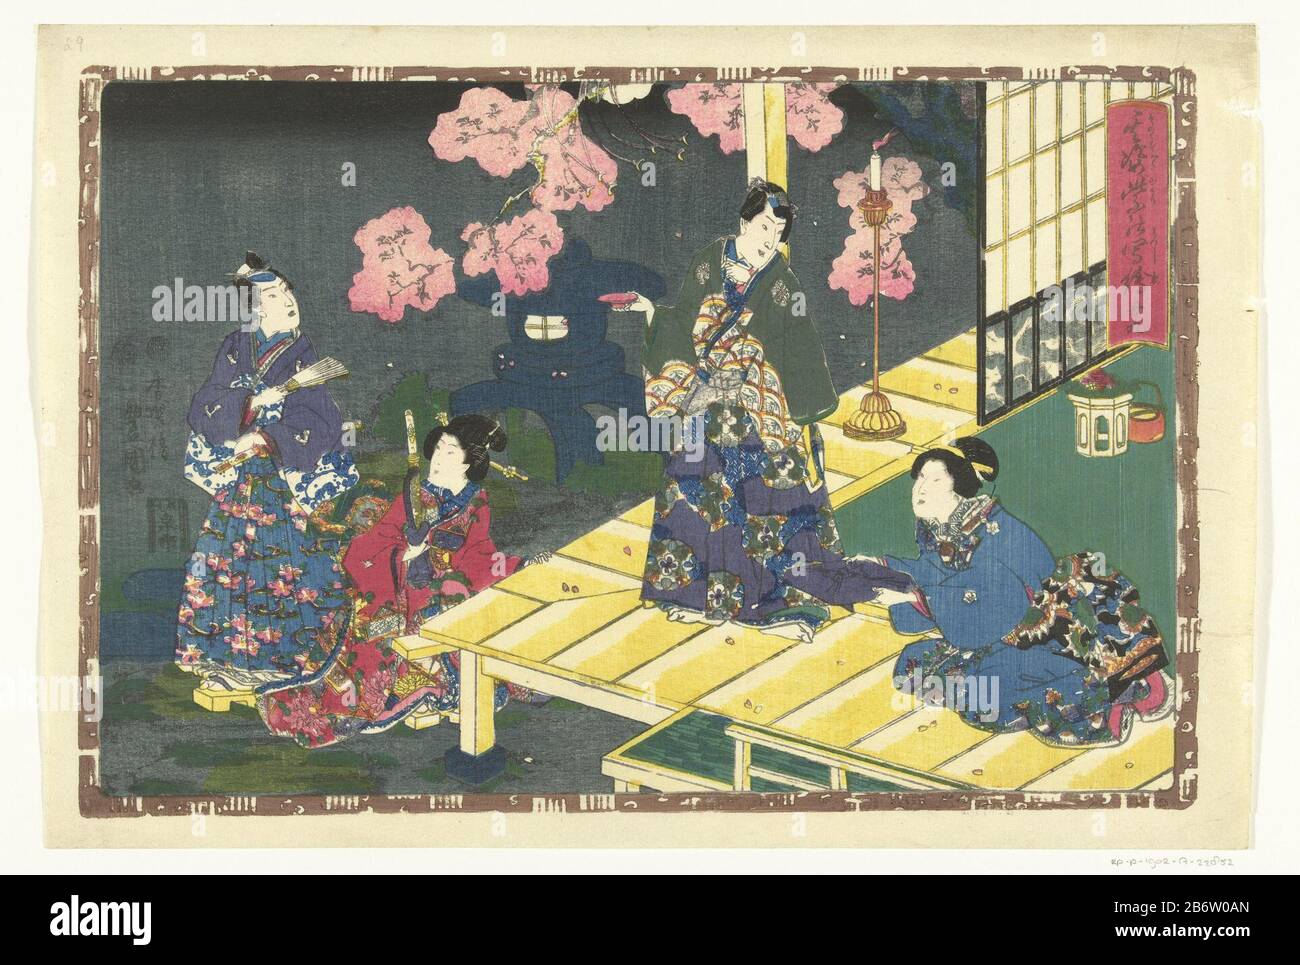 Hoofdstuk 29 Getrouwe afbeeldingen van de Schitterende Prins (serietitel) Sono sugata Hikaru no utsushi-e (serietitel op object) man and woman in garden with blossoming tree, with veranda Where: at the second man and woman; in the background a stone lantern; at night. Presentation enclosed by brown edge in which Genji emblemen. Manufacturer : print maker: Kunisada (I), Utagawa (indicated on object) censor: Fukushima Giemon (indicated on object) censor: Muramatsu Genroku (indicated on object) publisher: Izumiya Ichibei (Chance Endo) ( listed on object) Place manufacture: printmaker Japan Censor Stock Photo